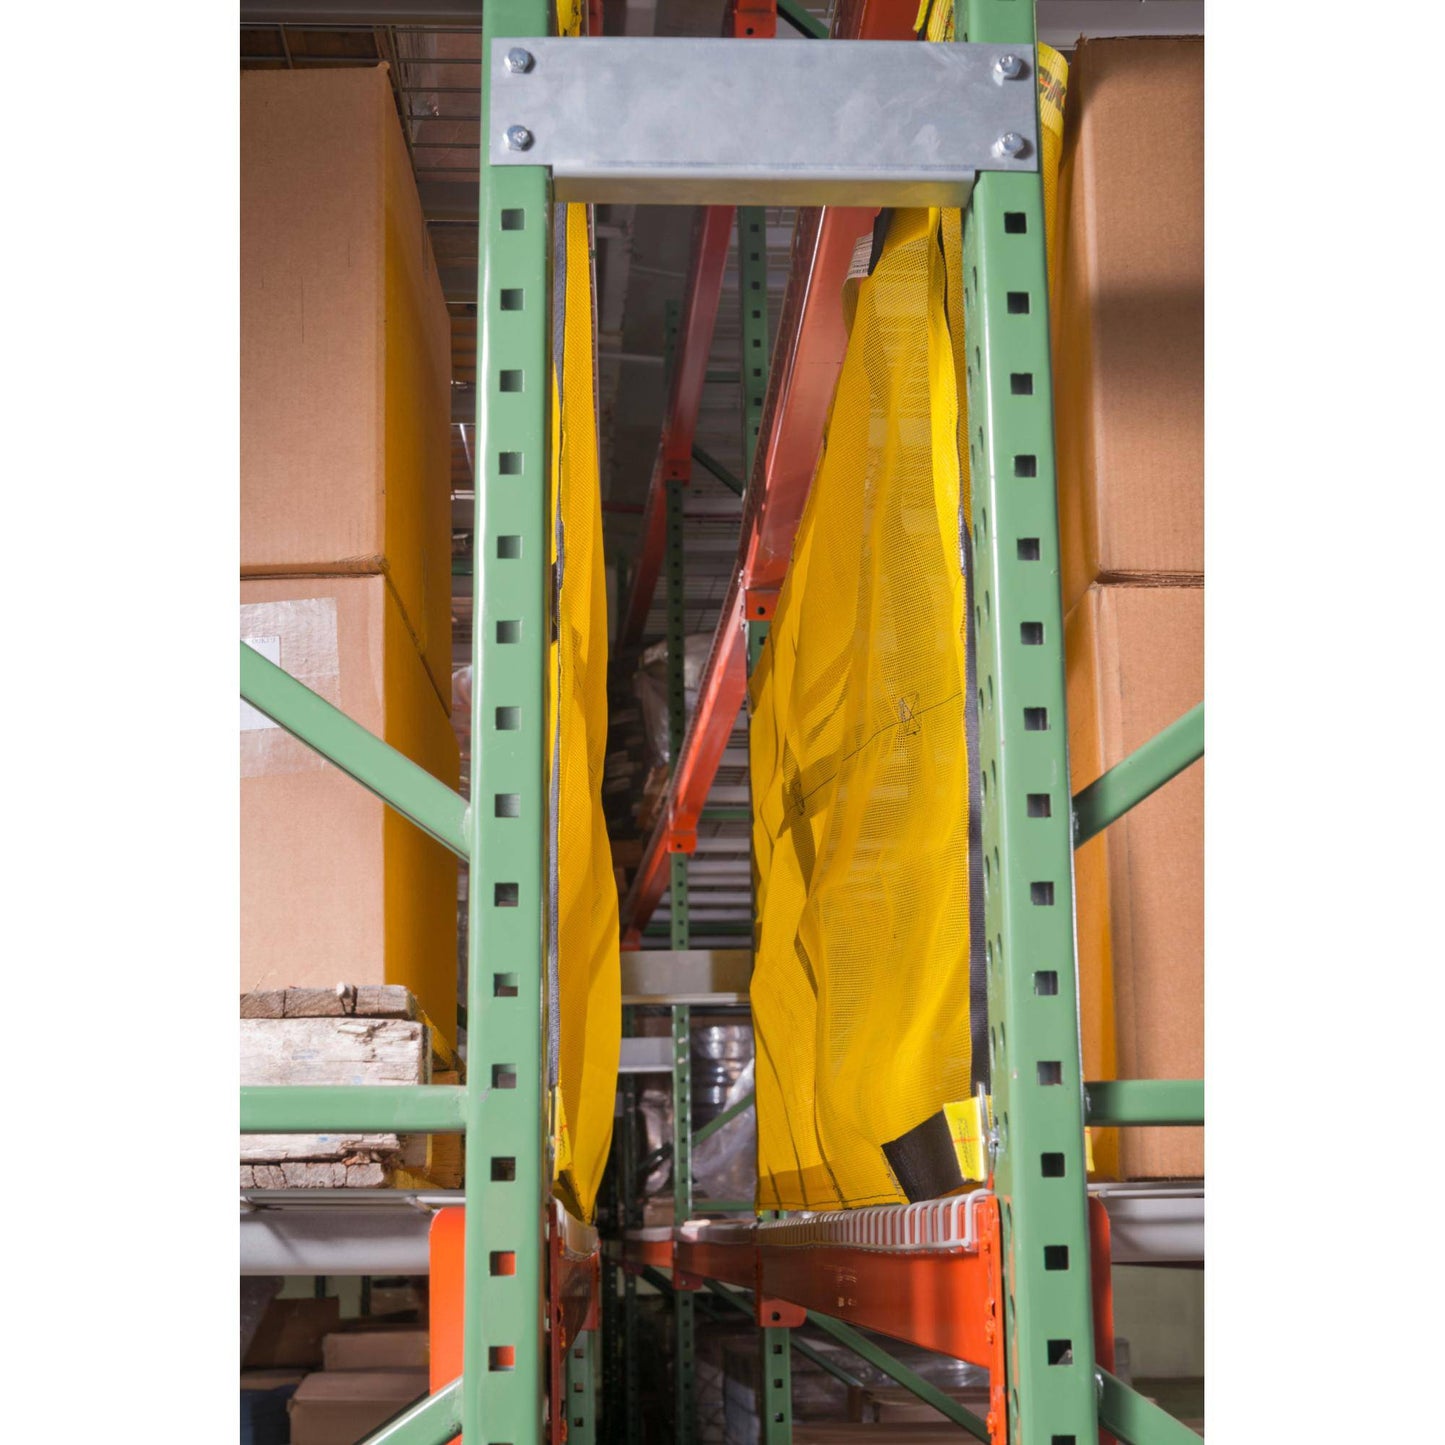 Pallet Rack Safety Nets - Standard/J-Hook Attachments - Adrian's Safety Solutions